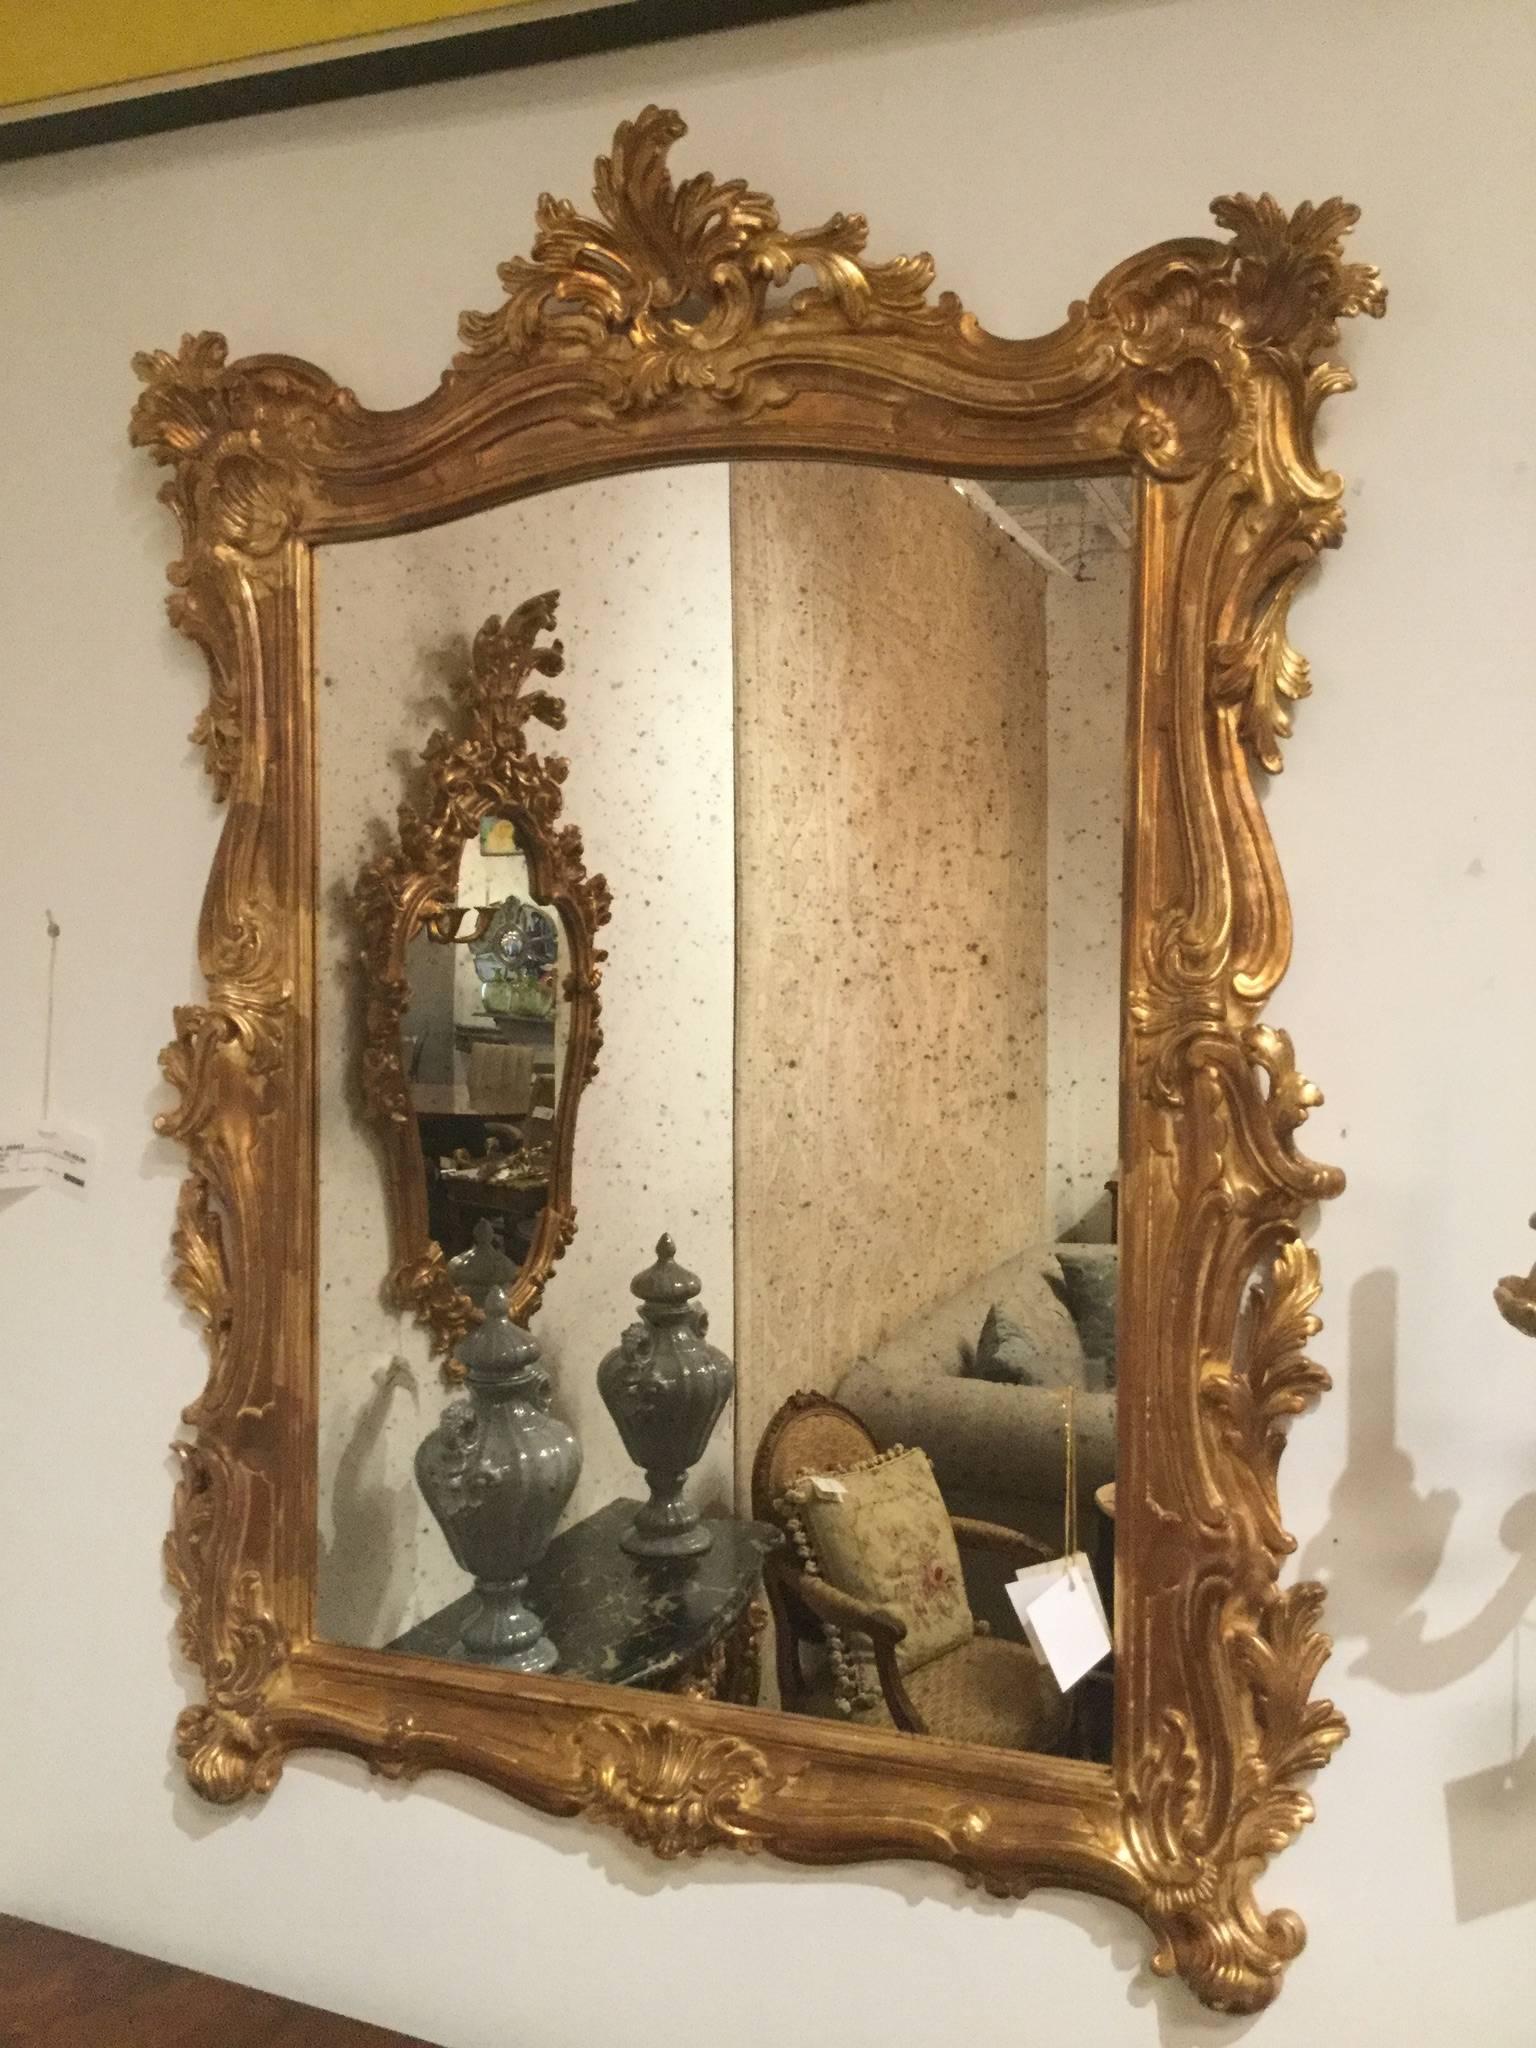 Pair of beautiful Rococo style gold gilt mirror featuring hand-carved foliate design around mirror frame and antiqued looking glass.  Created by the artisans of Italy.